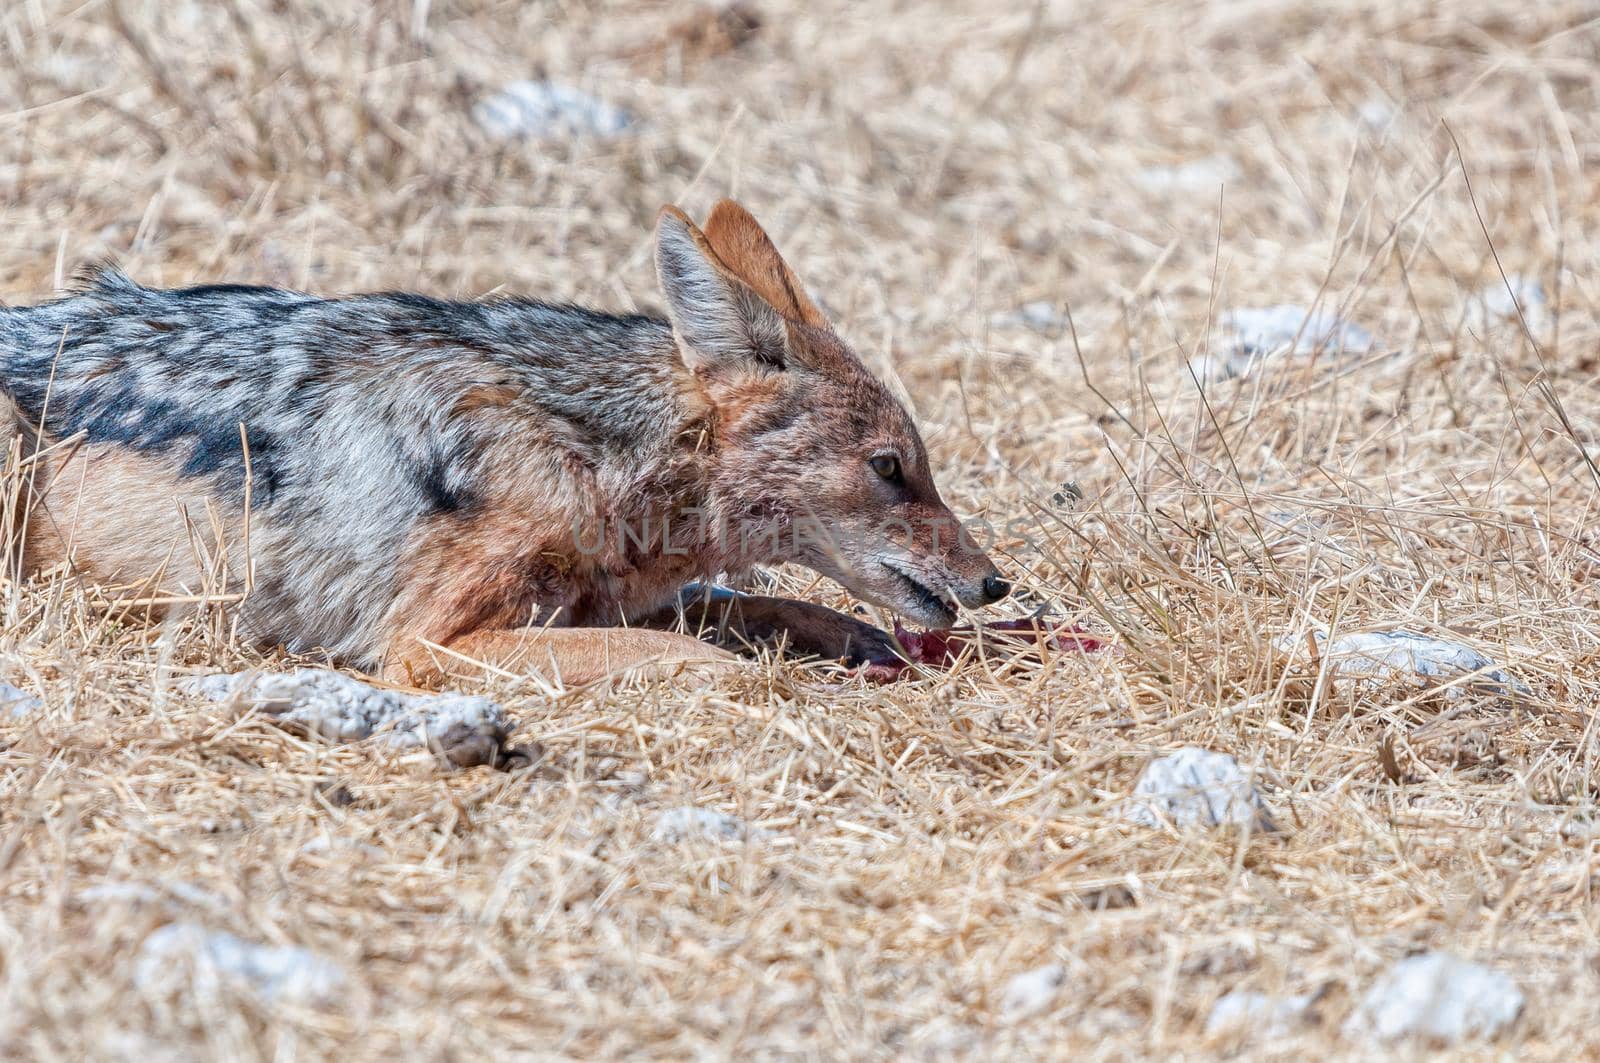 Black-backed jackal, Canis mesomelas, eating piece of meat by dpreezg